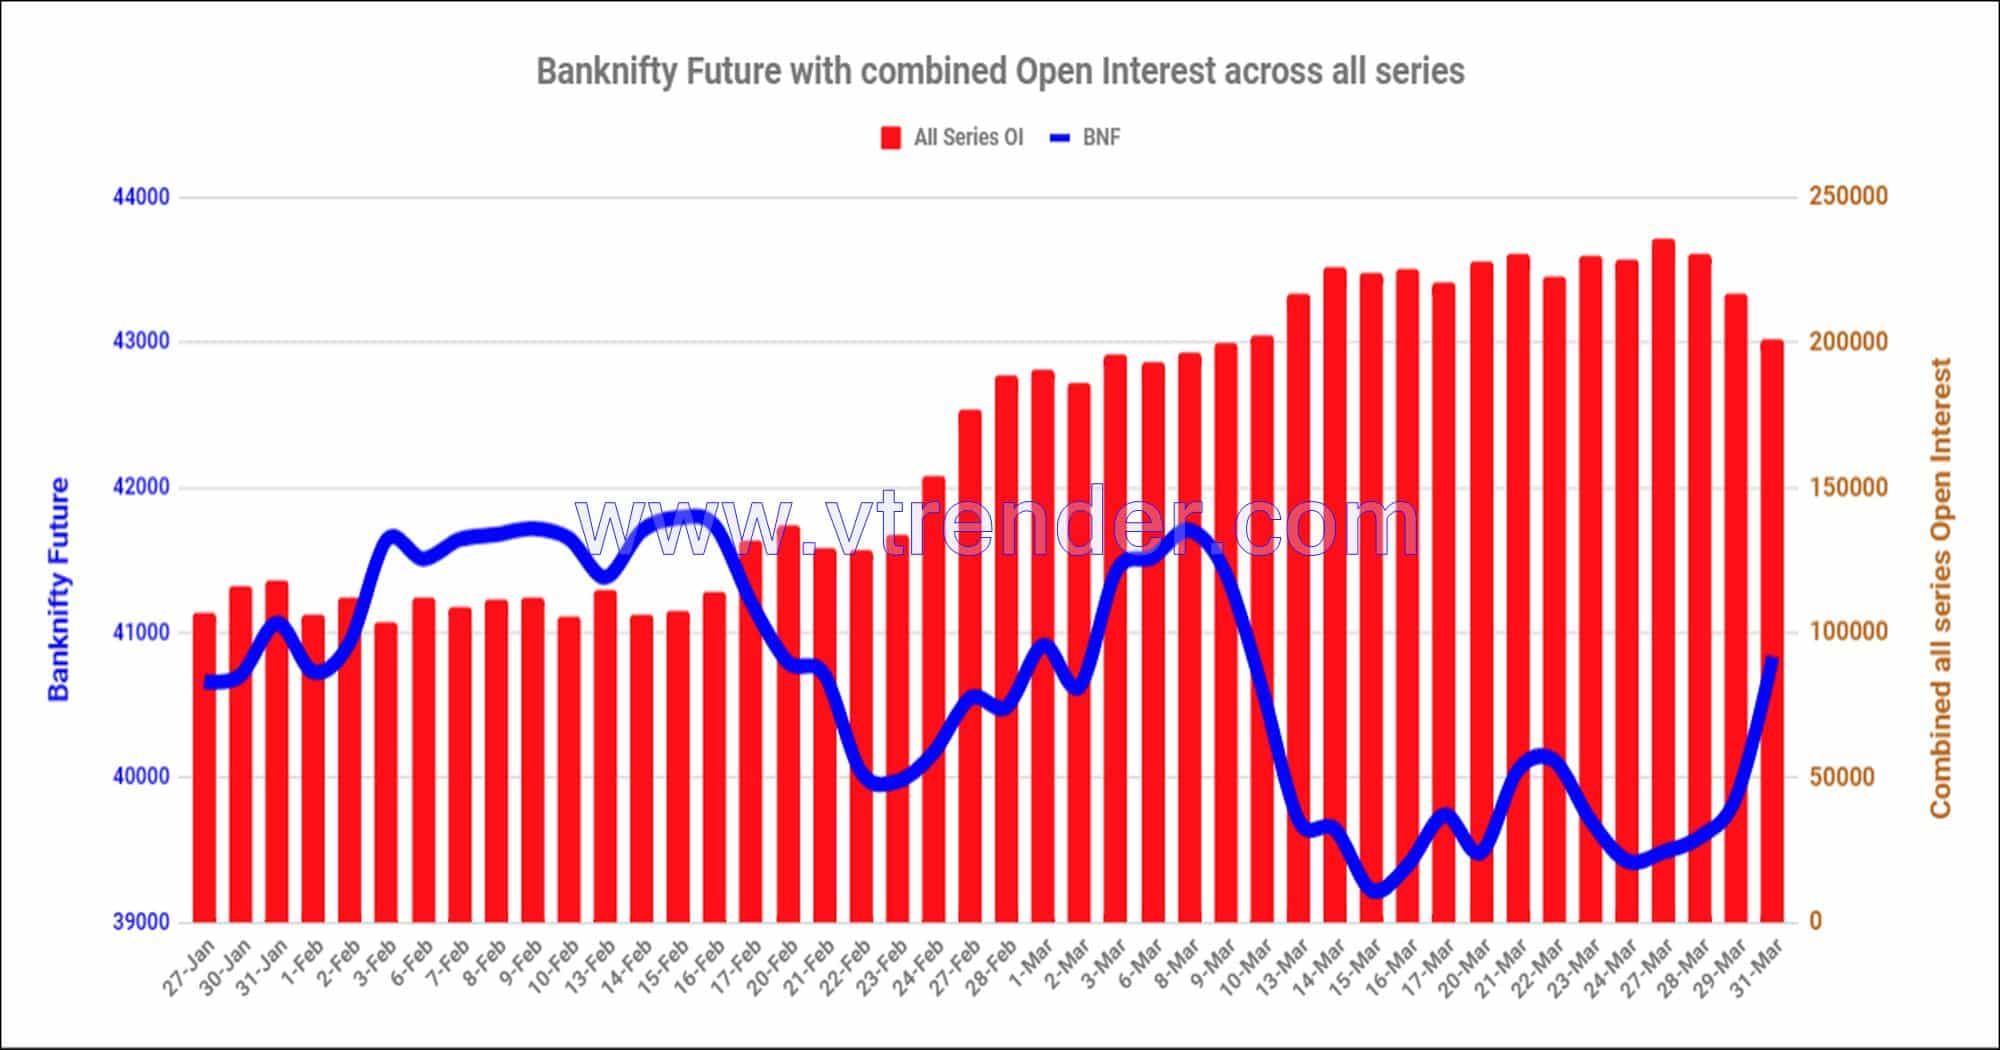 Bnf31Mar Nifty And Banknifty Futures With All Series Combined Open Interest – 31St Mar 2023 Banknifty, Nifty, Open Interest